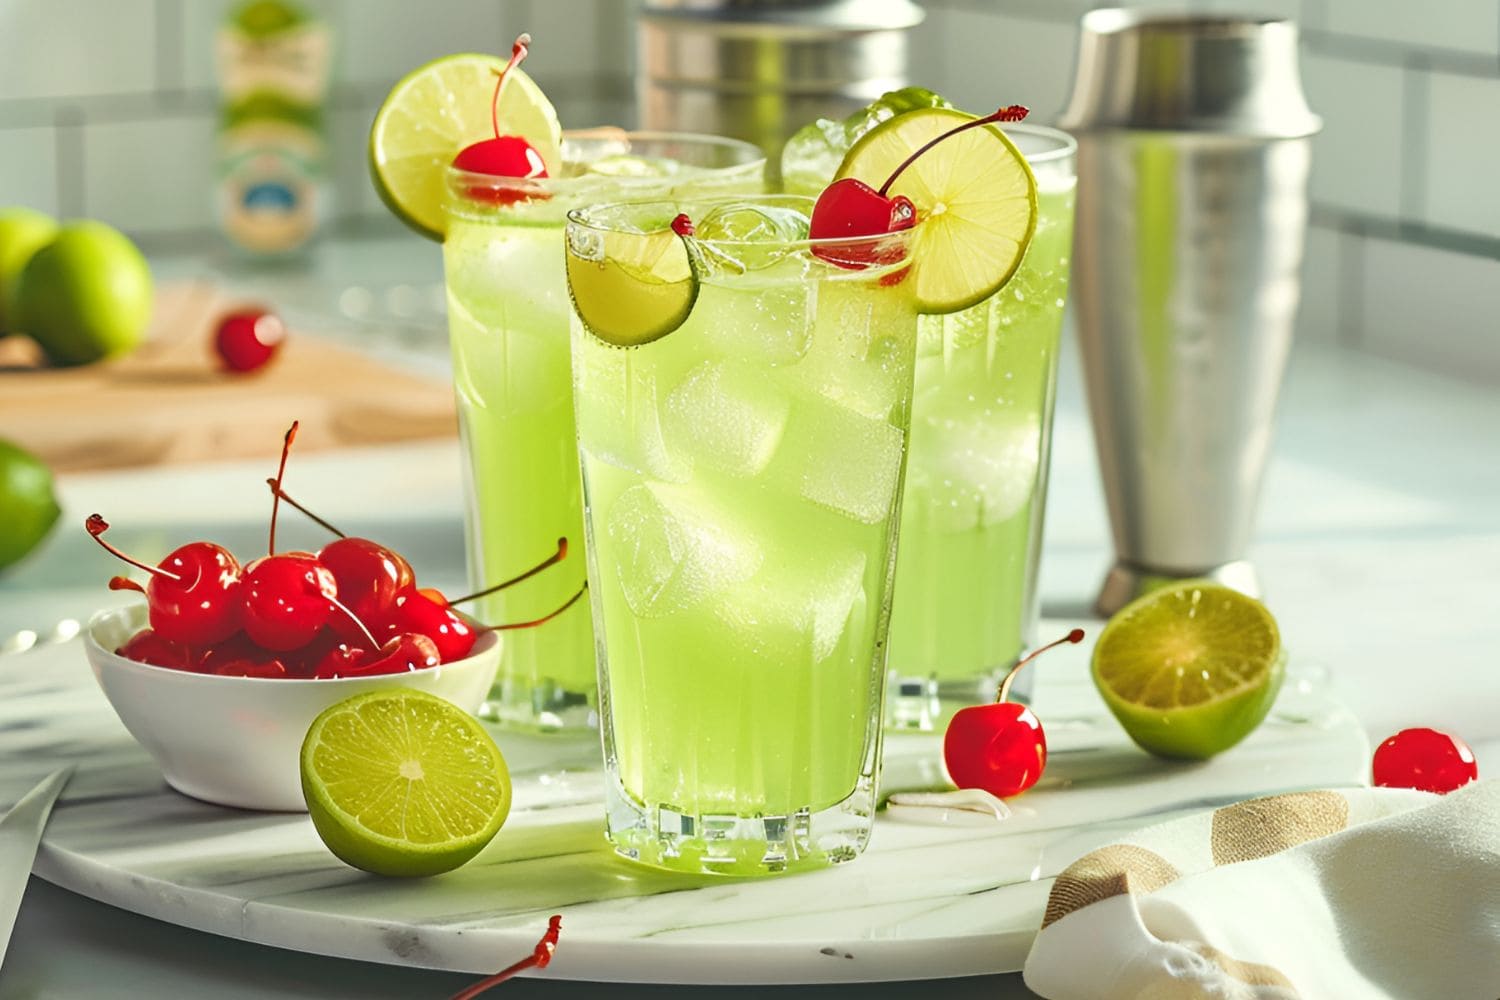 Three Tall Glasses of Bright Green Tokyo Tea Cocktails with Lime Wheels and Cherries and a Cocktail Shaker in the Background with More Cherries and Limes